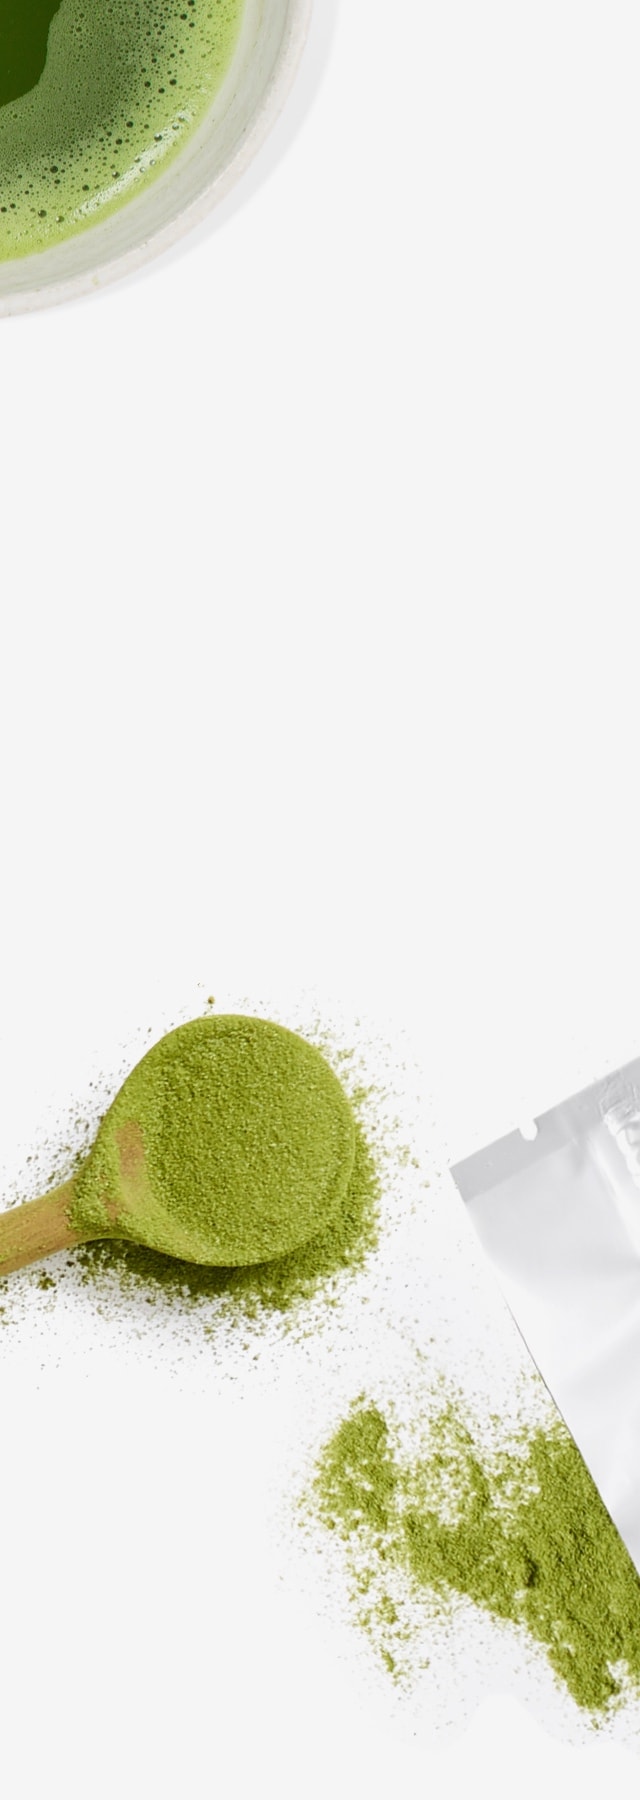 A cup filled with matcha next to a wooden spoon and bag filled with matcha.